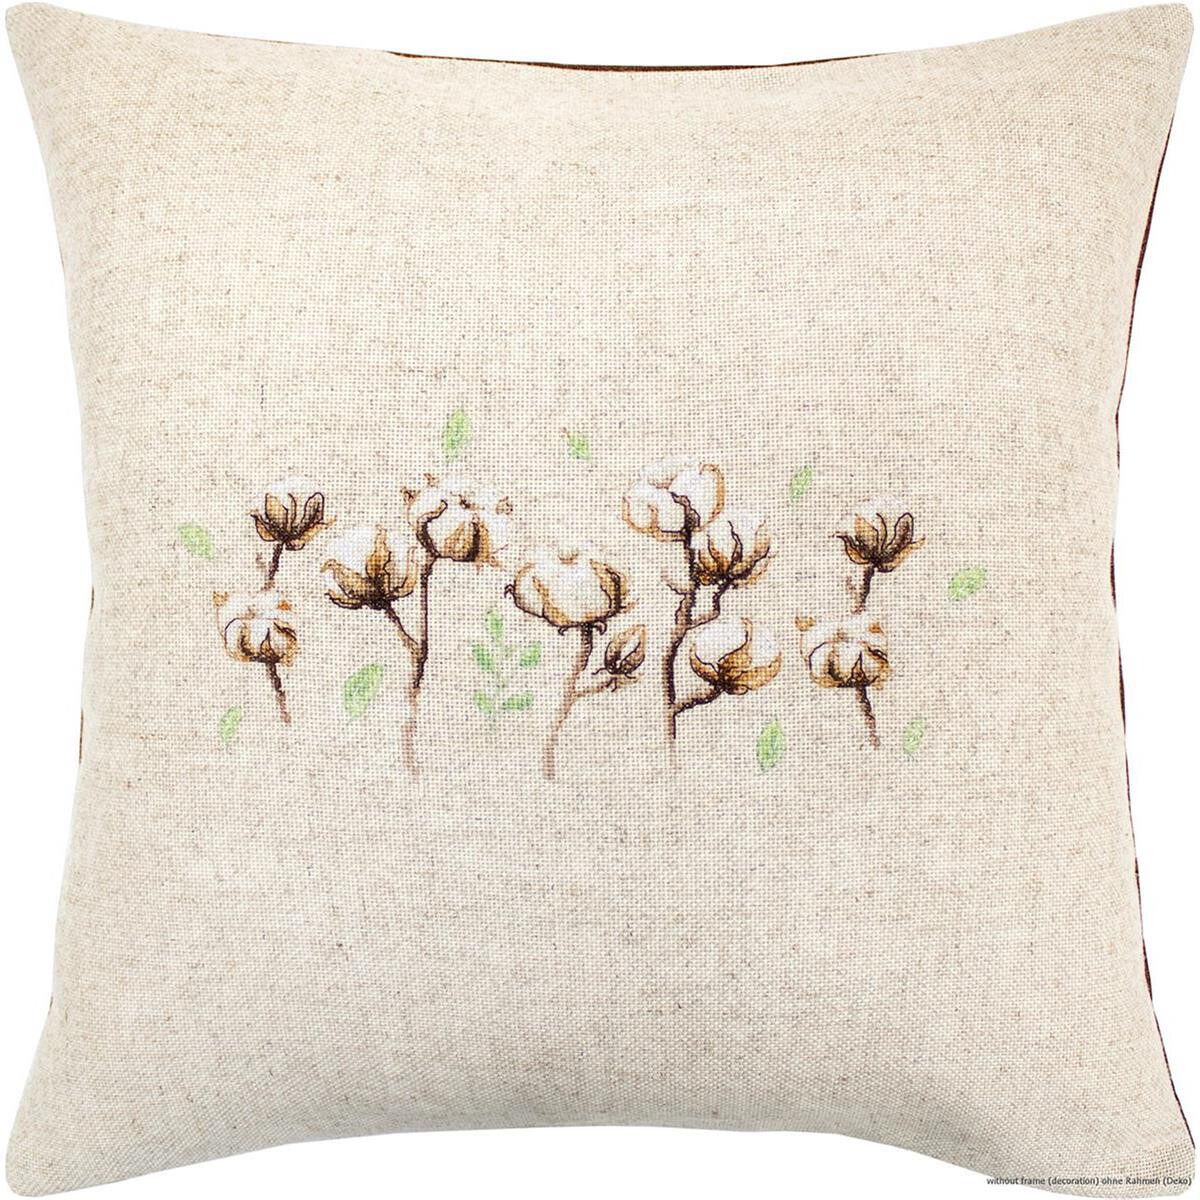 A square throw pillow with a beige textured fabric cover...